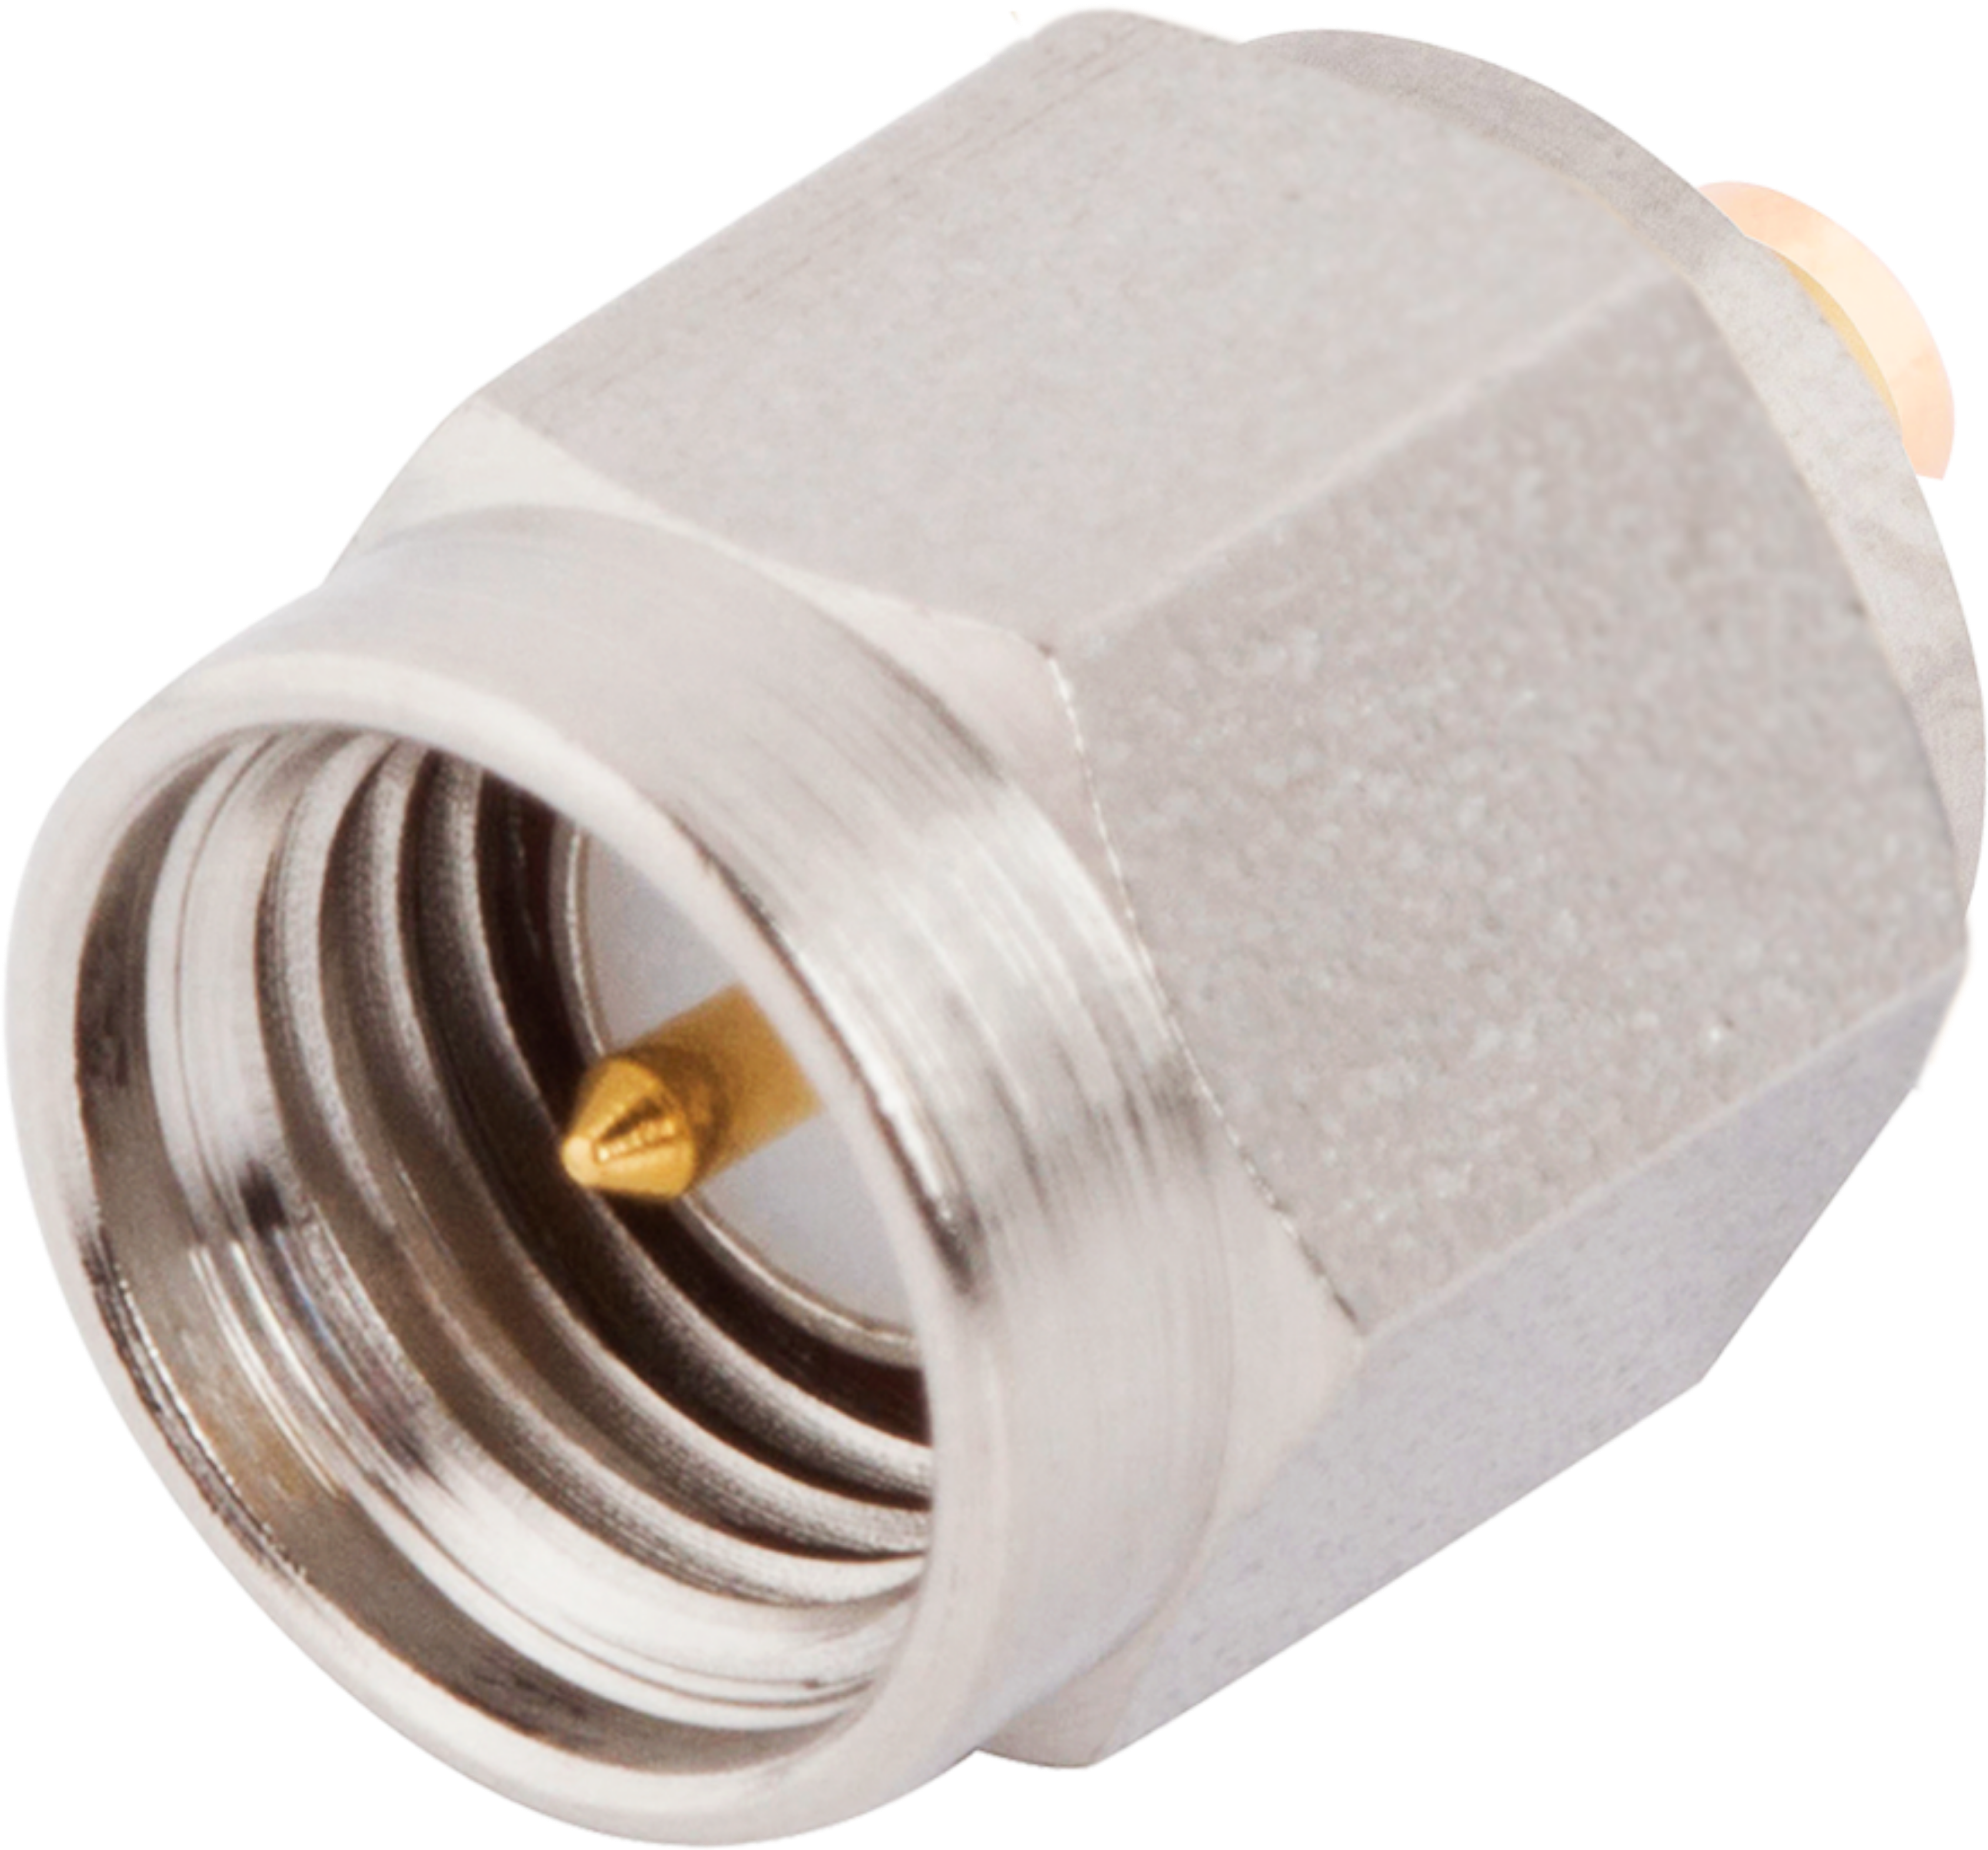 SMA Male Connector for .141 Cable, SF2902-6001